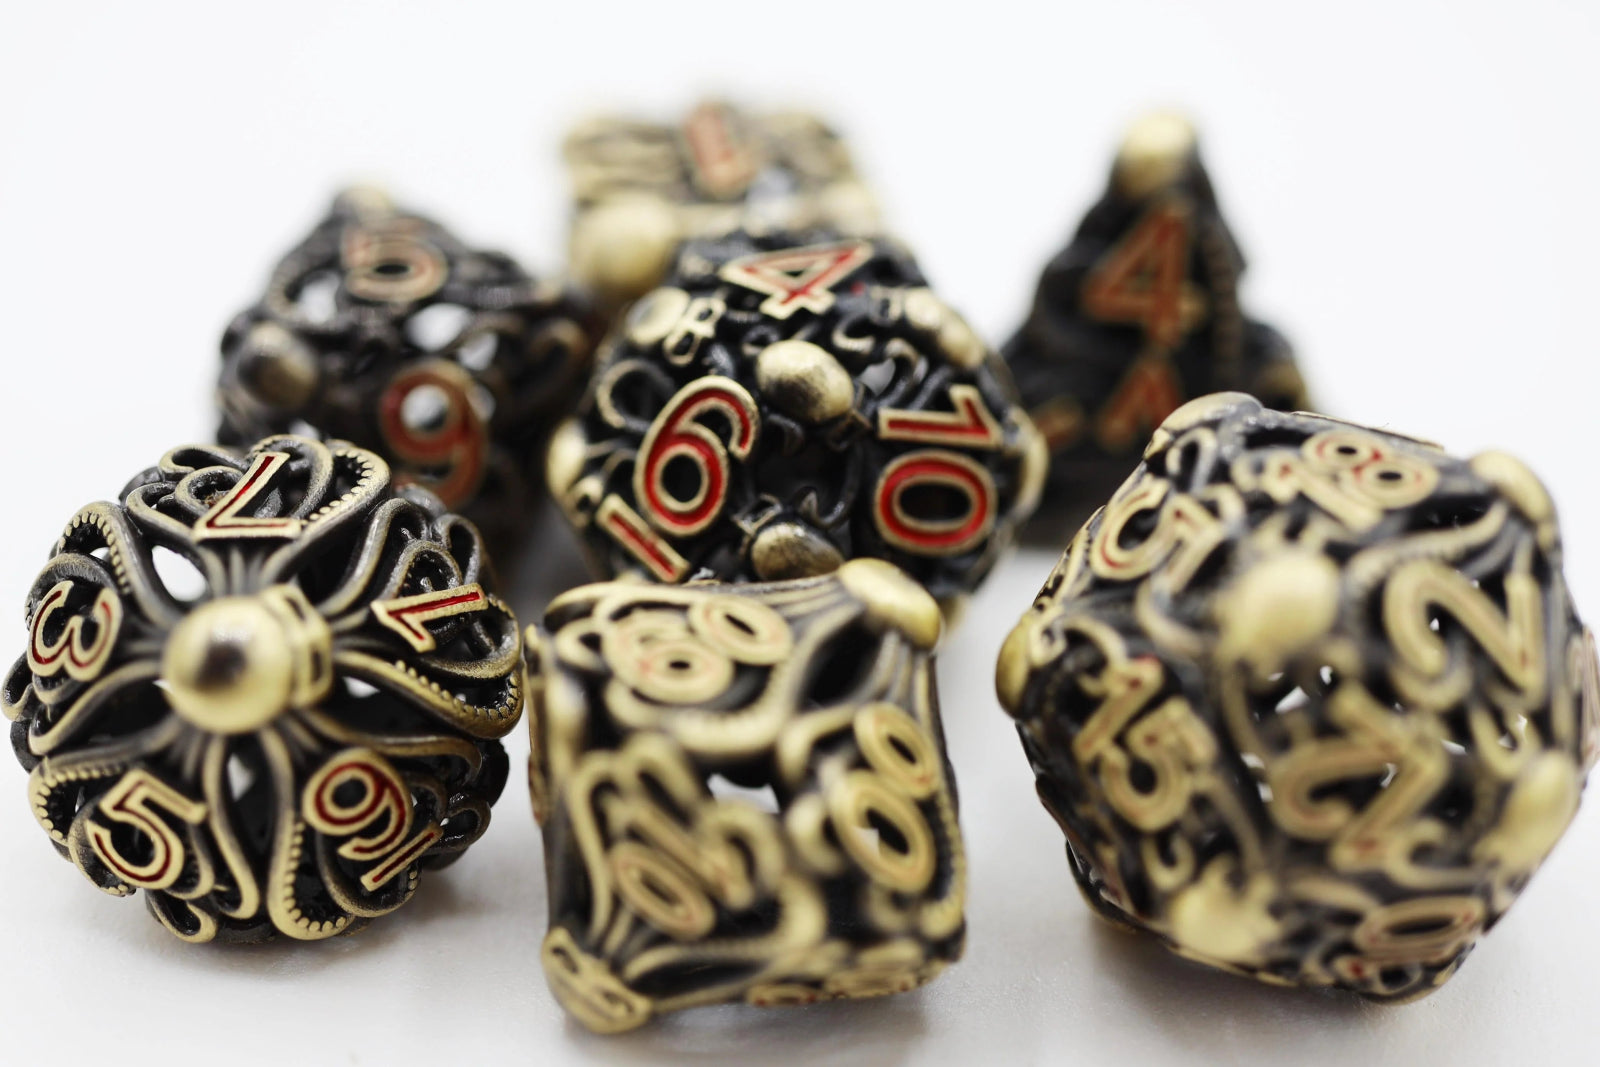 Mind Eater: Bronze - Hollow Metal RPG Dice Set - The Fourth Place